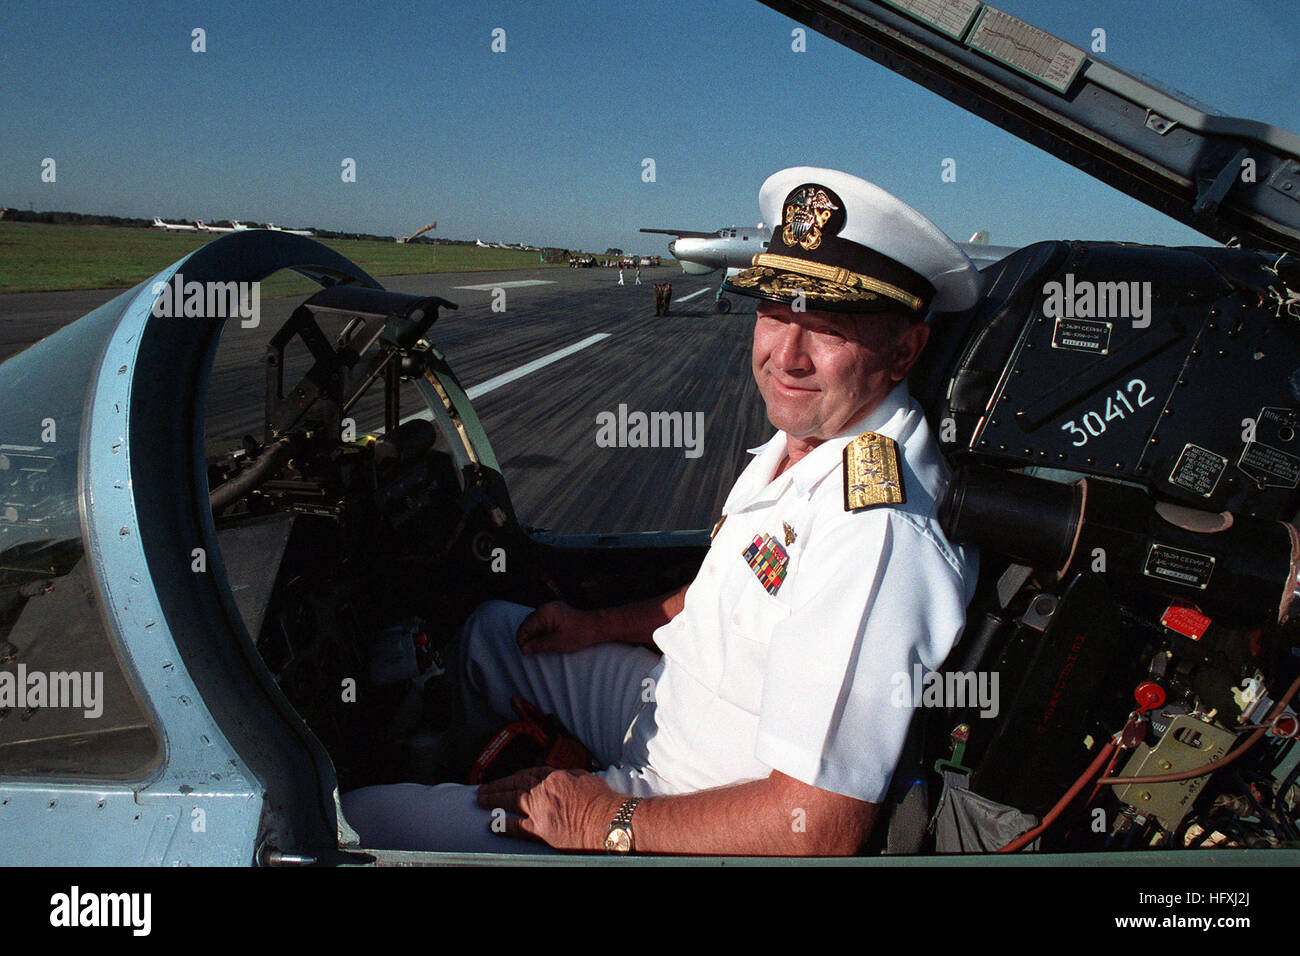 Vice Admiral John H. Fetterman Jr., Commander, Naval Air Force, US Pacific Fleet,  sits in the cockpit of a Soviet Su-27 Flanker aircraft during a visit to an air base.  Fetterman is in the Soviet Union with two US Navy ships, the guided missile cruiser USS PRINCETON (CG-59) and the guided missile frigate USS REUBEN JAMES (FFG 57), for a four-day goodwill visit. Vice Admiral John Fetterman Stock Photo